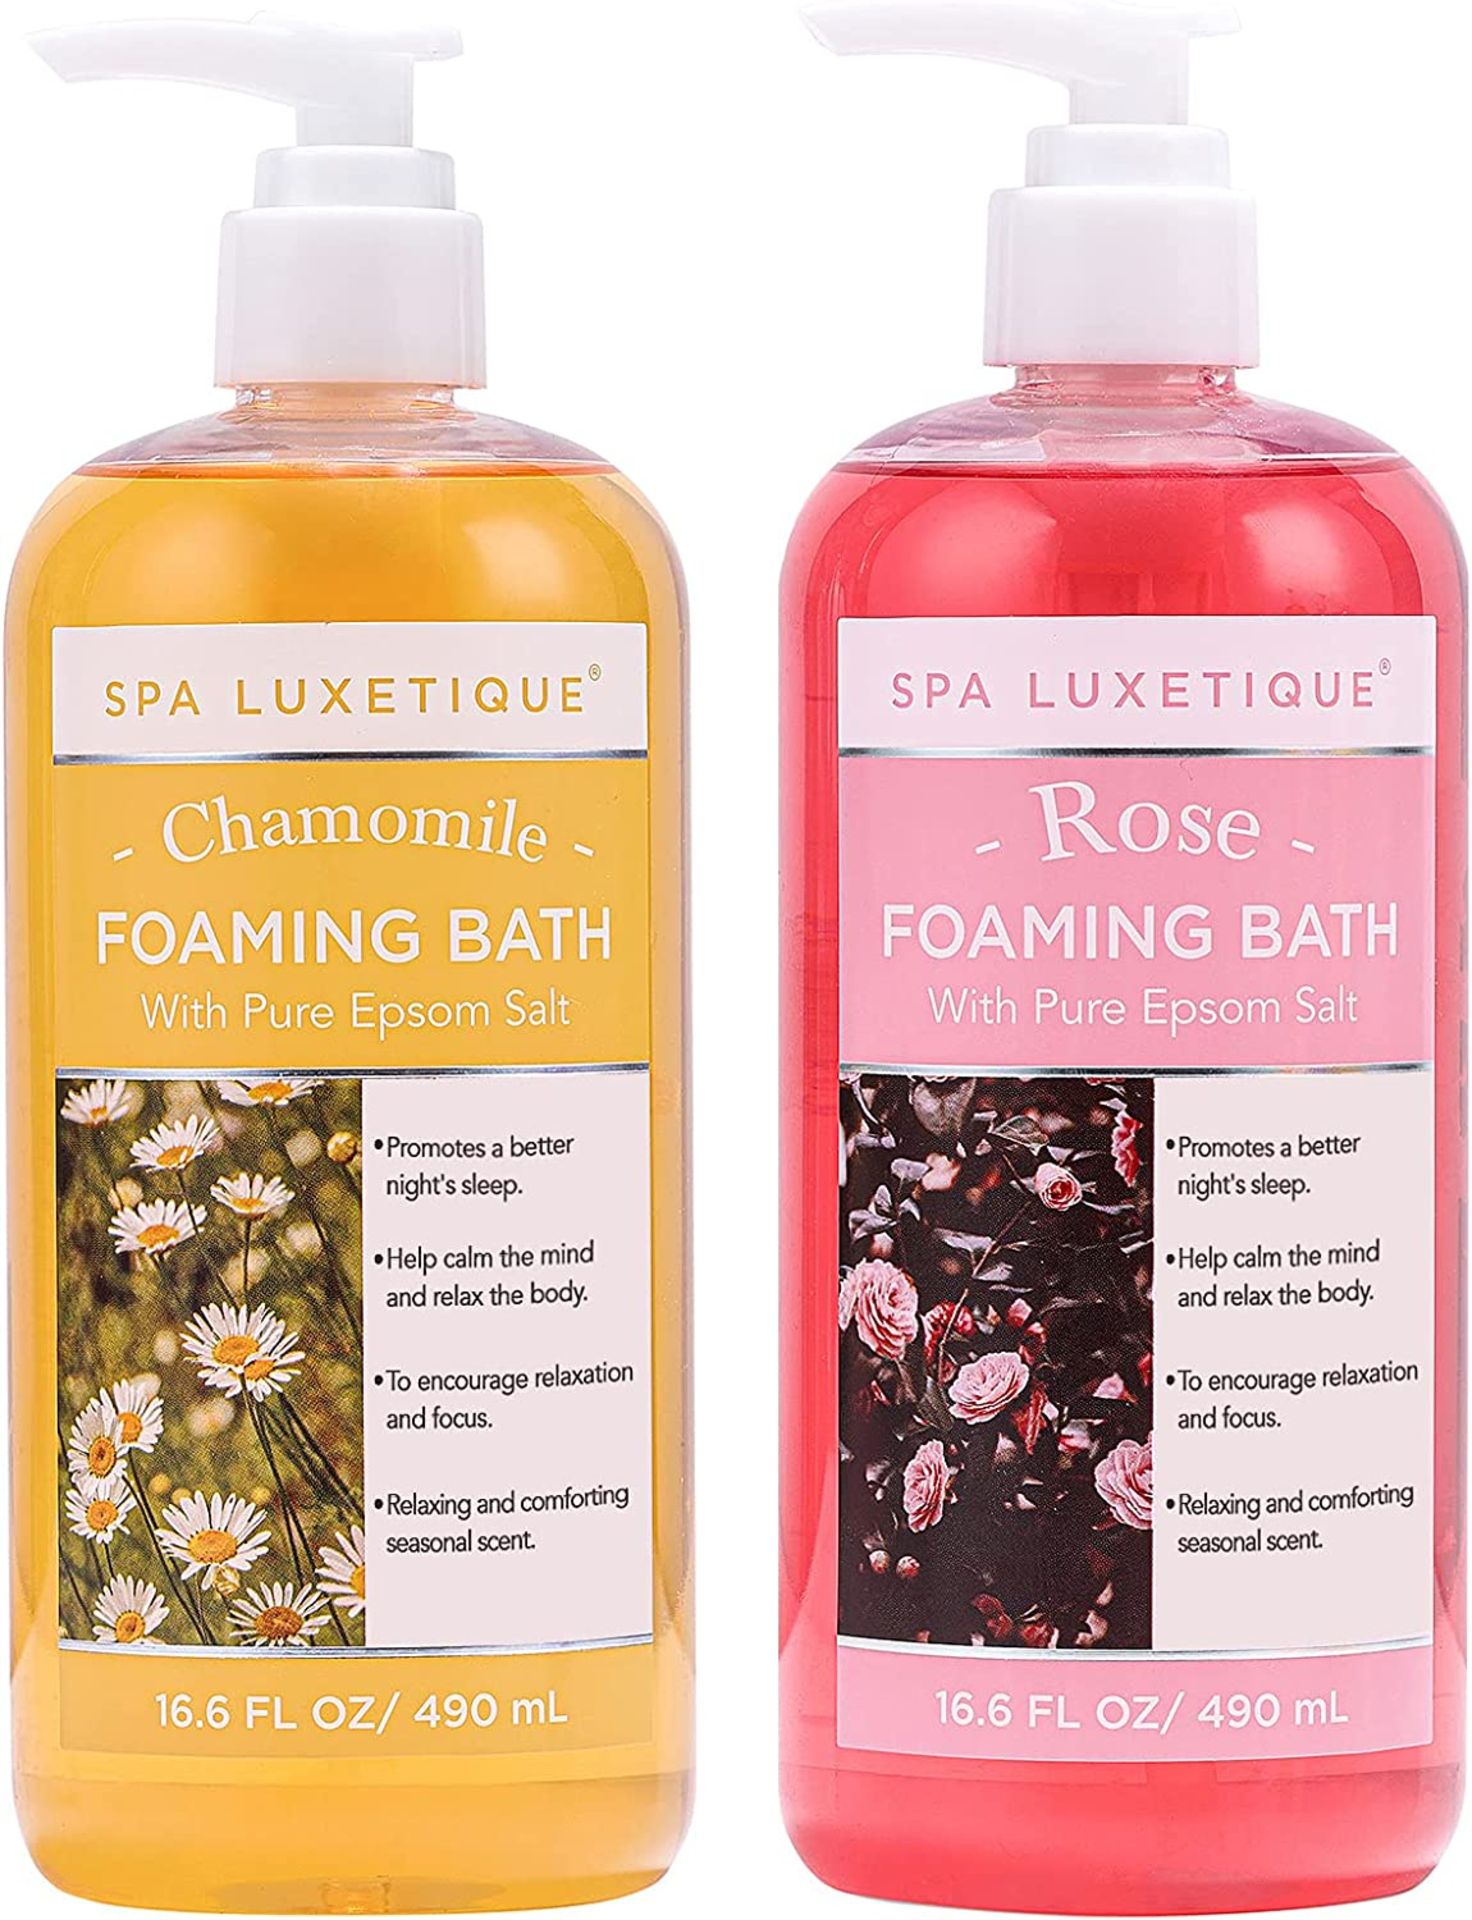 PALLET TO CONTAIN 120 x NEW PACKAGED SETS OF 2 Spa Luxetique Rose and Chamomile Foaming Bath. (SPA-